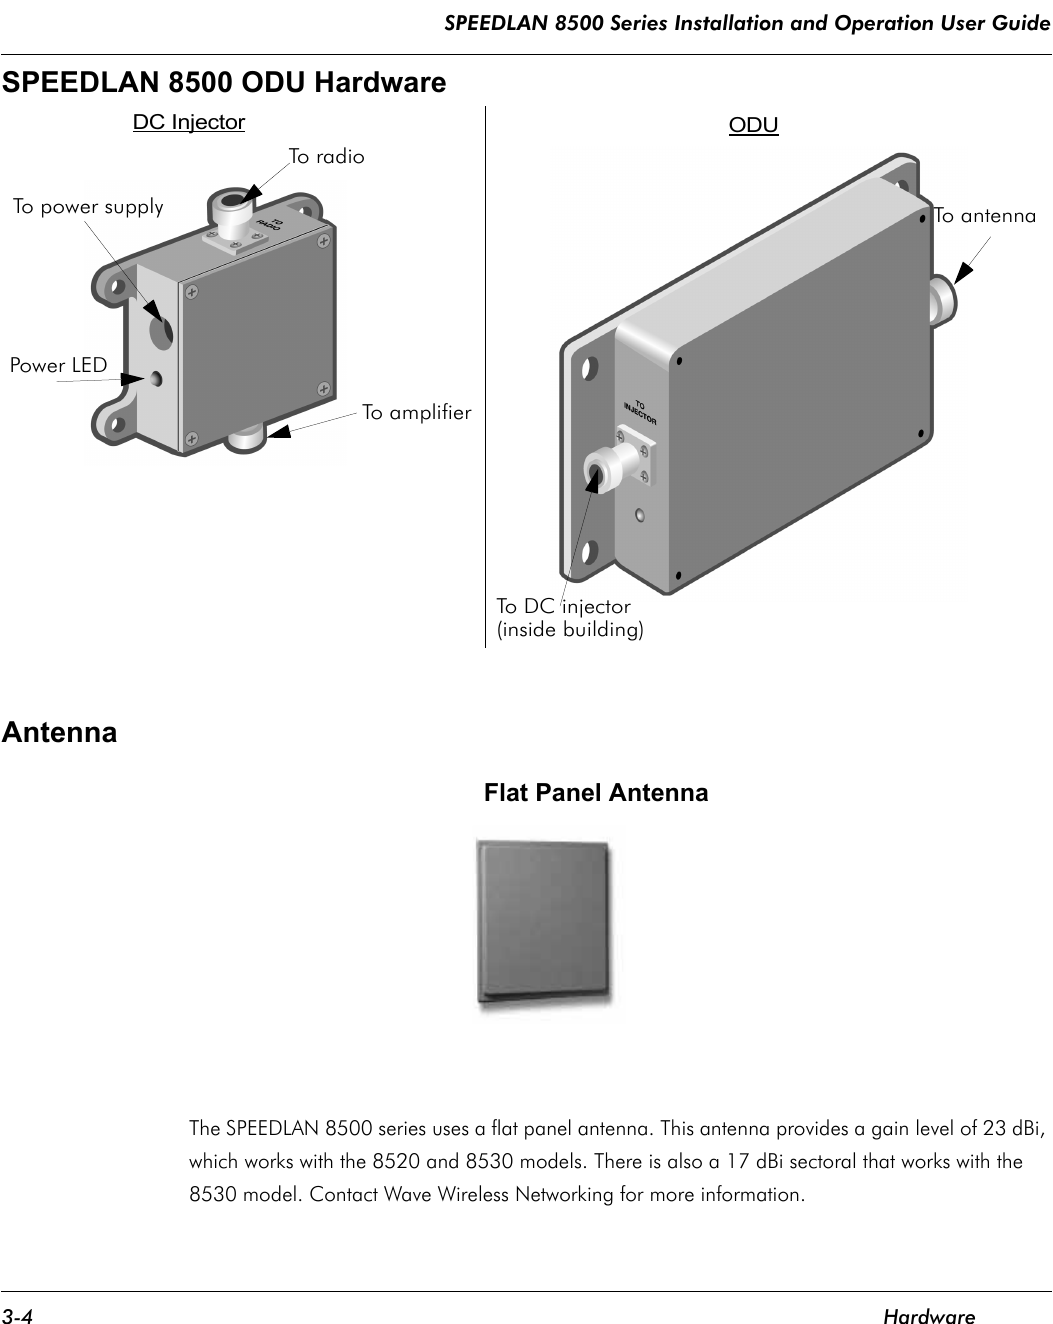 SPEEDLAN 8500 Series Installation and Operation User Guide 3-4 HardwareSPEEDLAN 8500 ODU HardwareAntenna                                                                     Flat Panel AntennaThe SPEEDLAN 8500 series uses a flat panel antenna. This antenna provides a gain level of 23 dBi, which works with the 8520 and 8530 models. There is also a 17 dBi sectoral that works with the 8530 model. Contact Wave Wireless Networking for more information.(inside building) ODUDC InjectorTo DC injectorPower LEDTo  p o w e r s u p p l yTo radioTo amplifierTo a n t e n n a